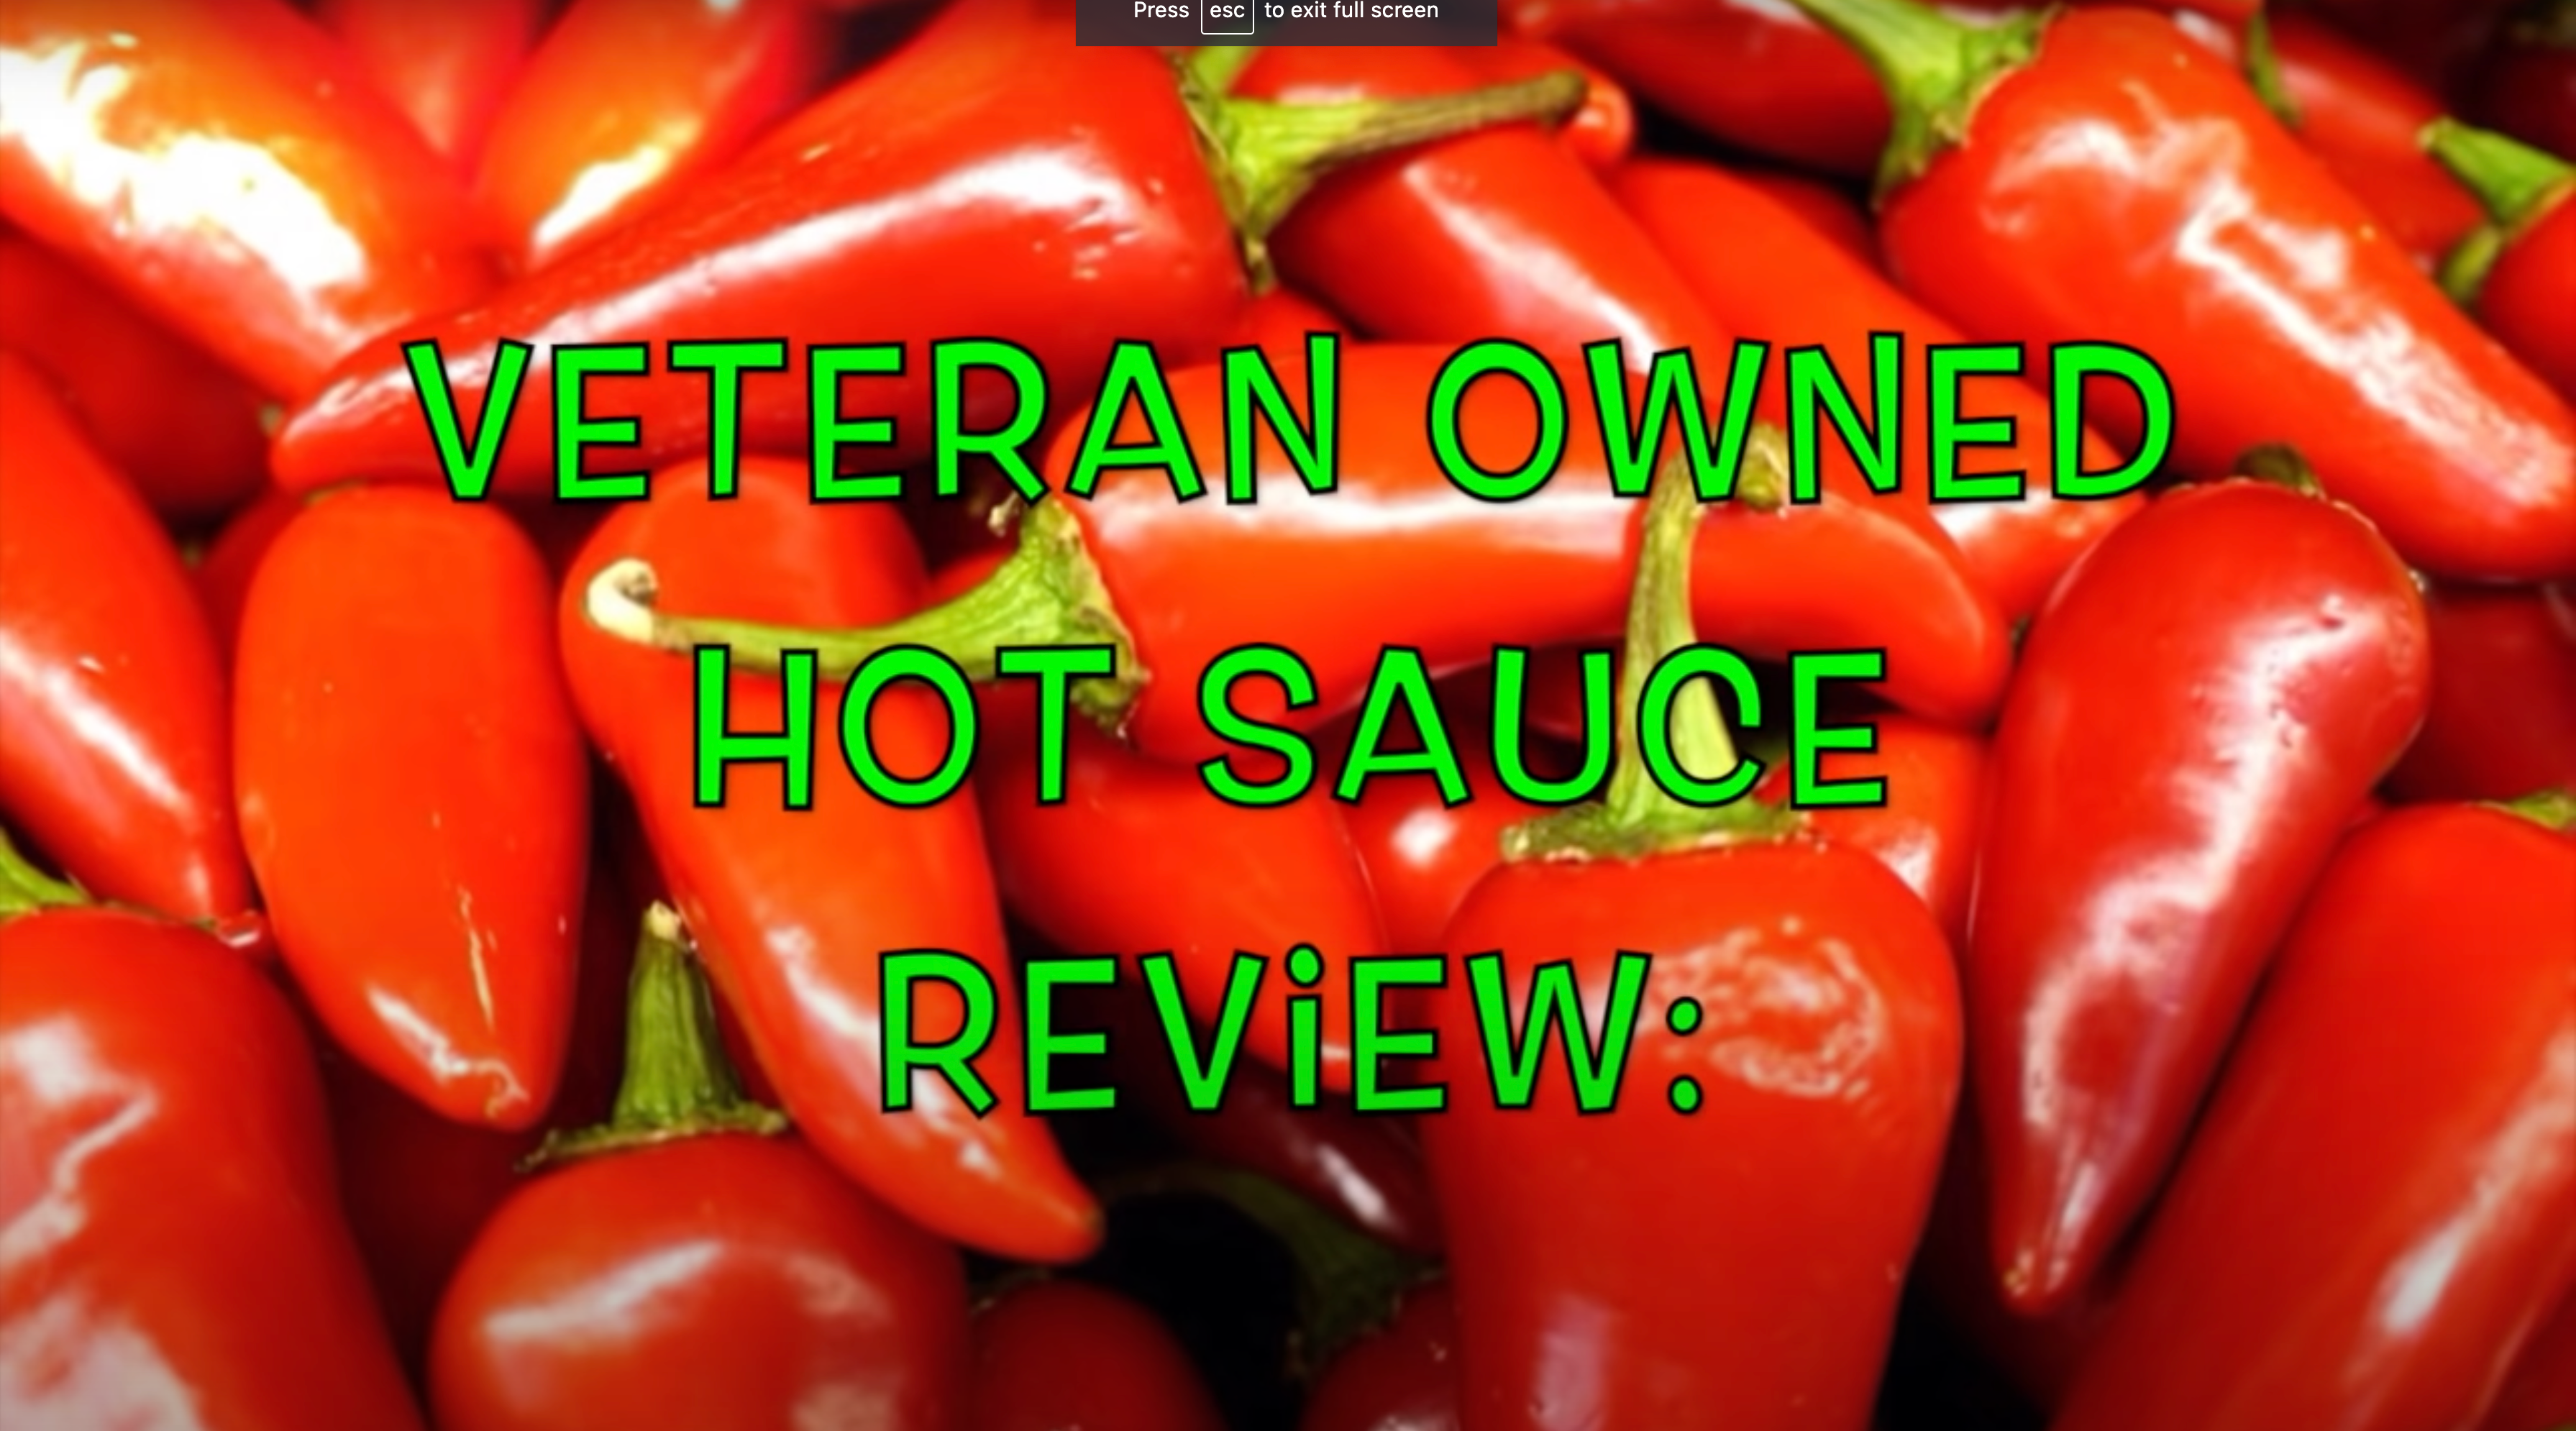 Veteran Owned Hot Sauce Review: Freedom Hot Sauce! -By Specops56